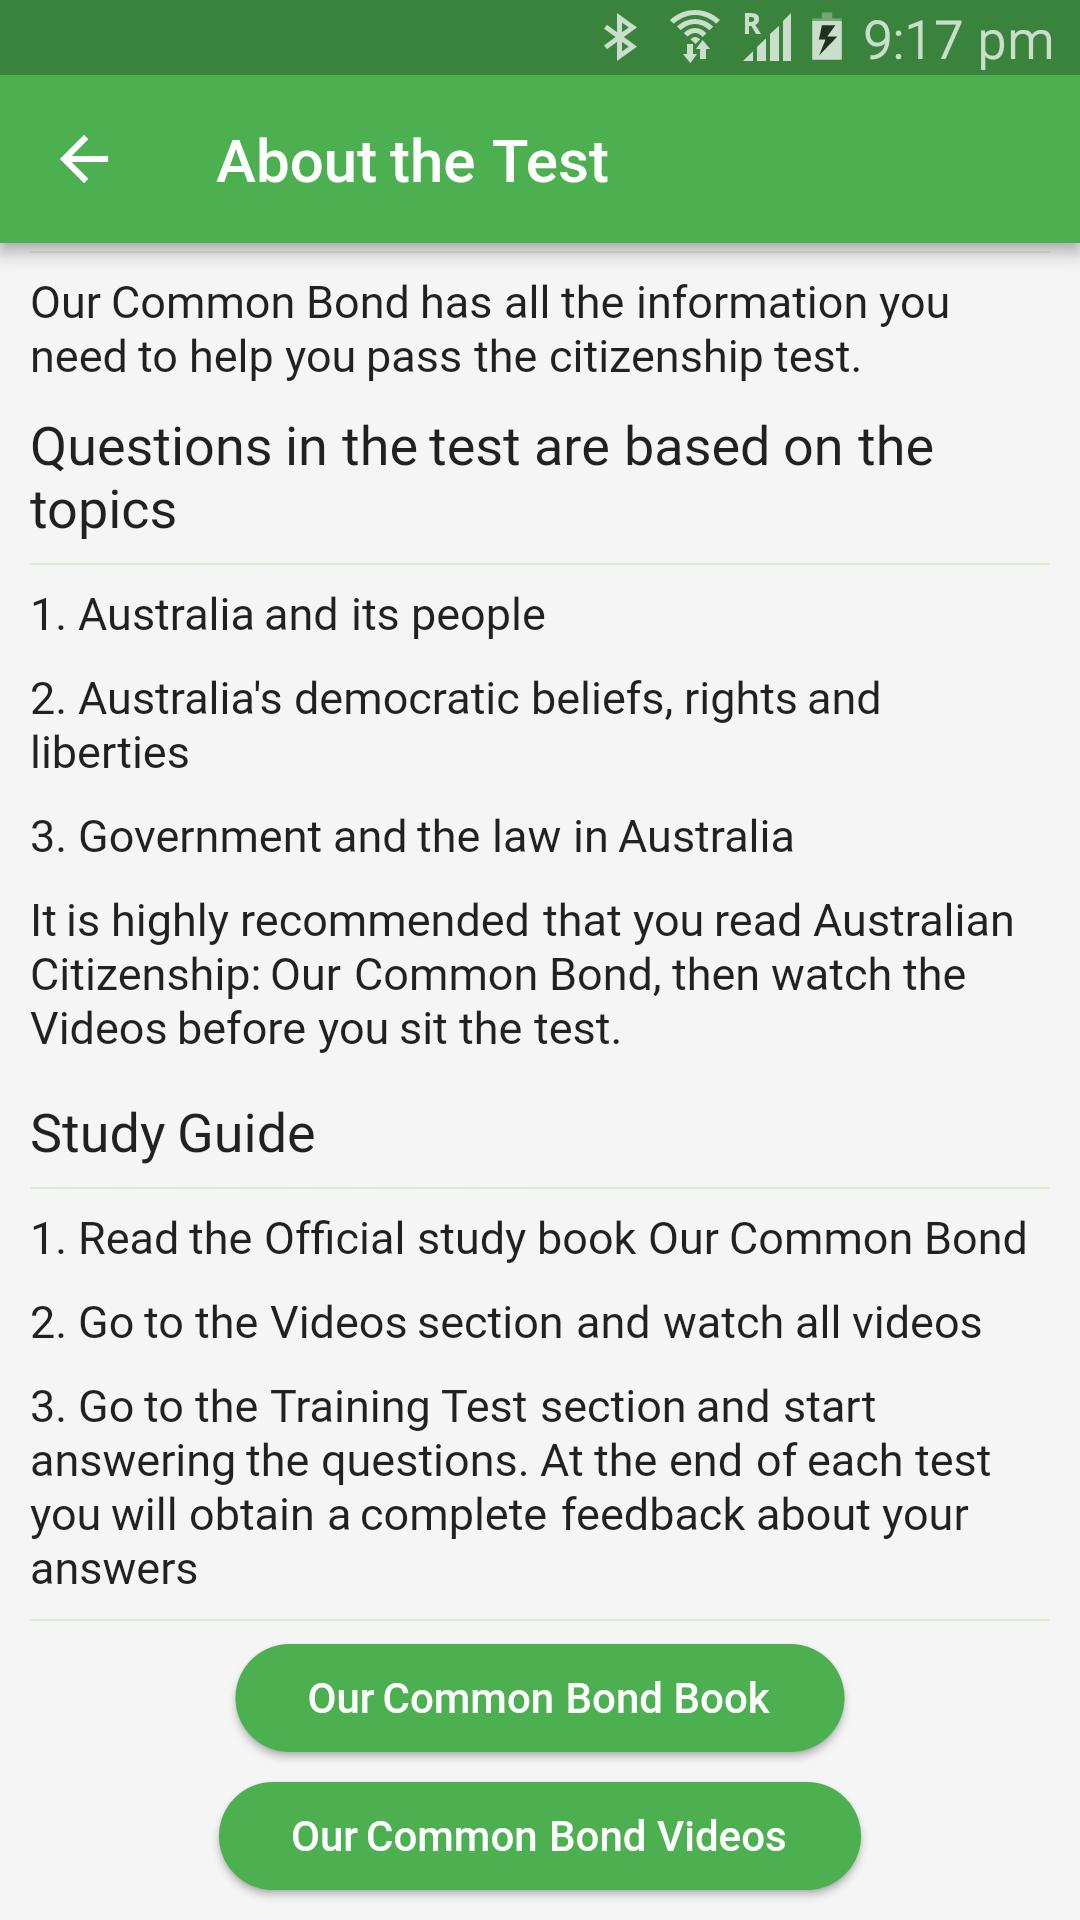 Australian Test for Android - APK